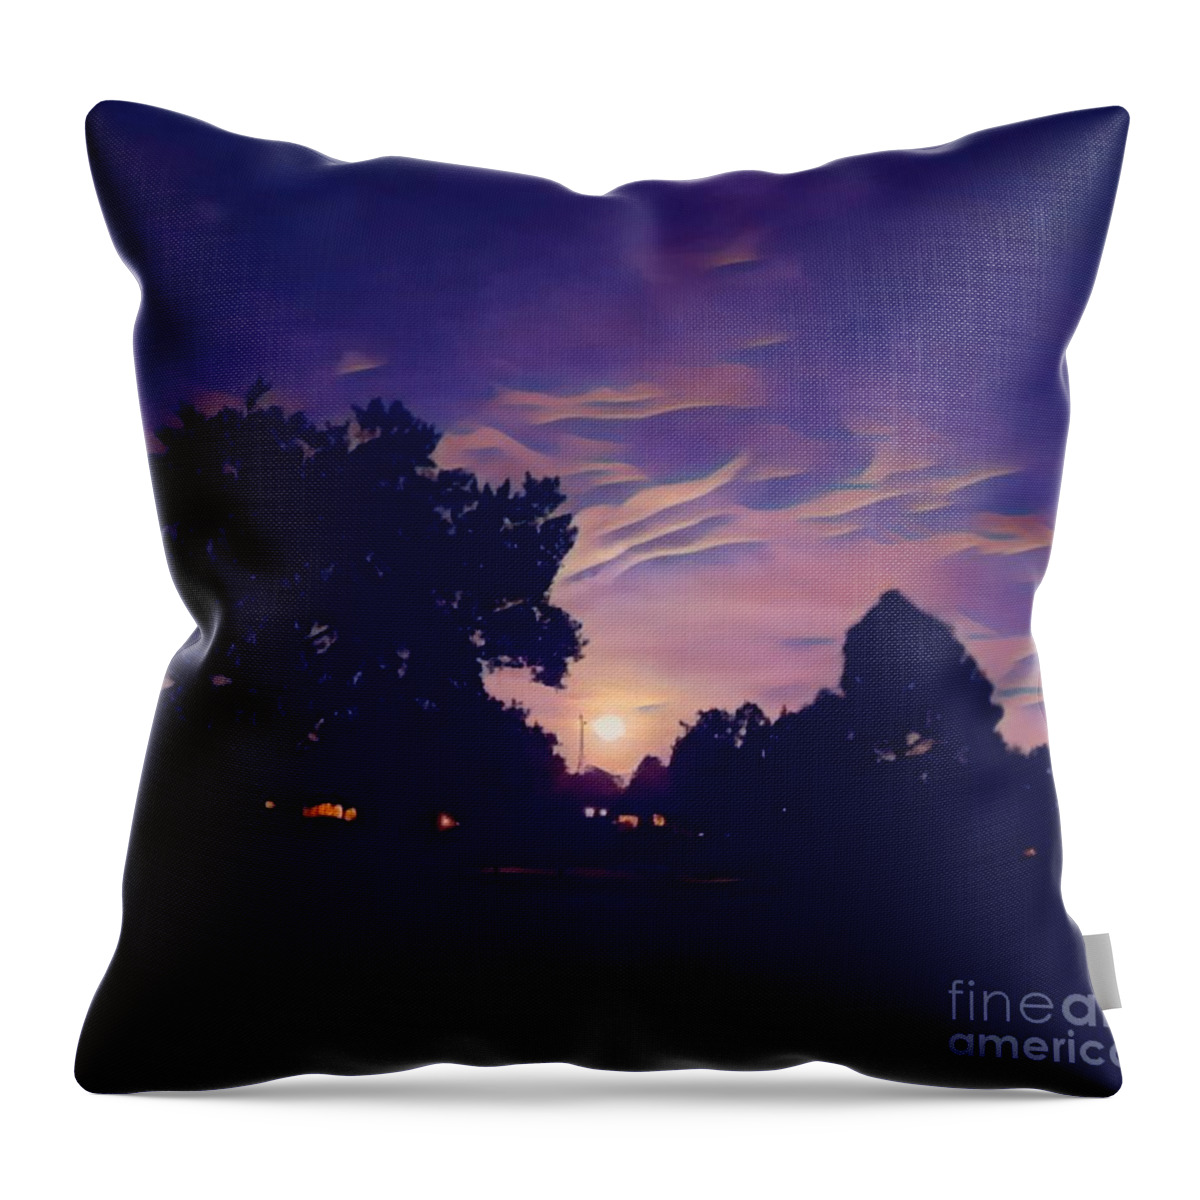 Colorado Throw Pillow featuring the digital art Colorado Full Moon Sky by Mars Besso